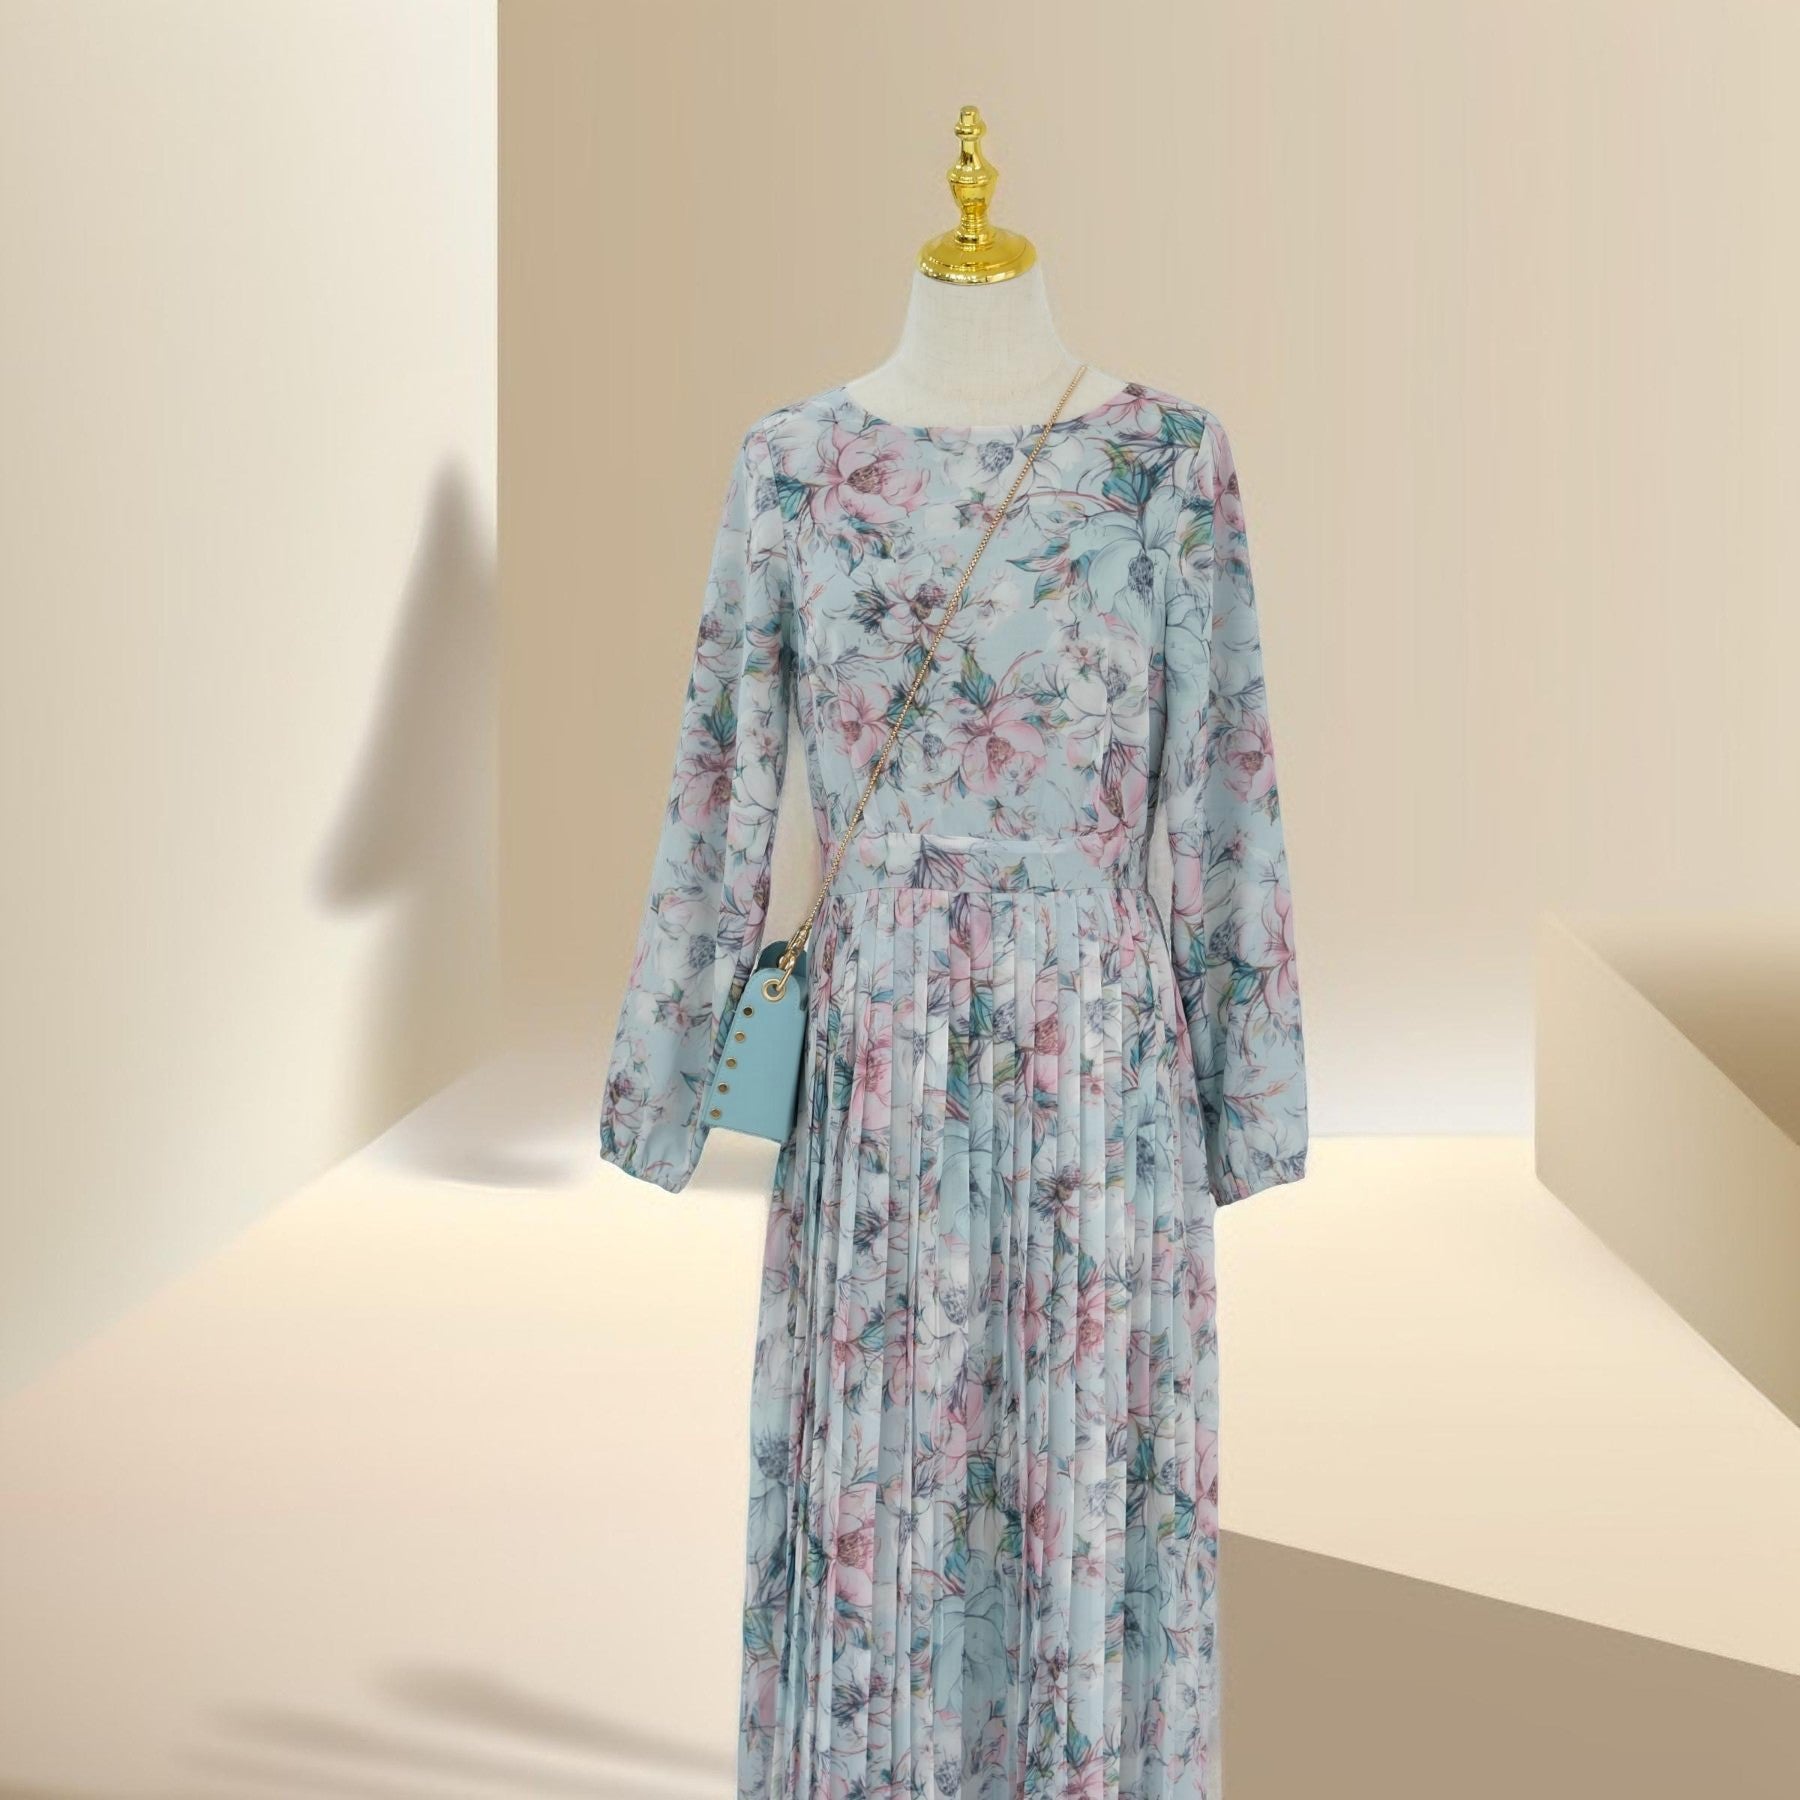 Diana pleated floral chiffon dress - Try Modest Limited 